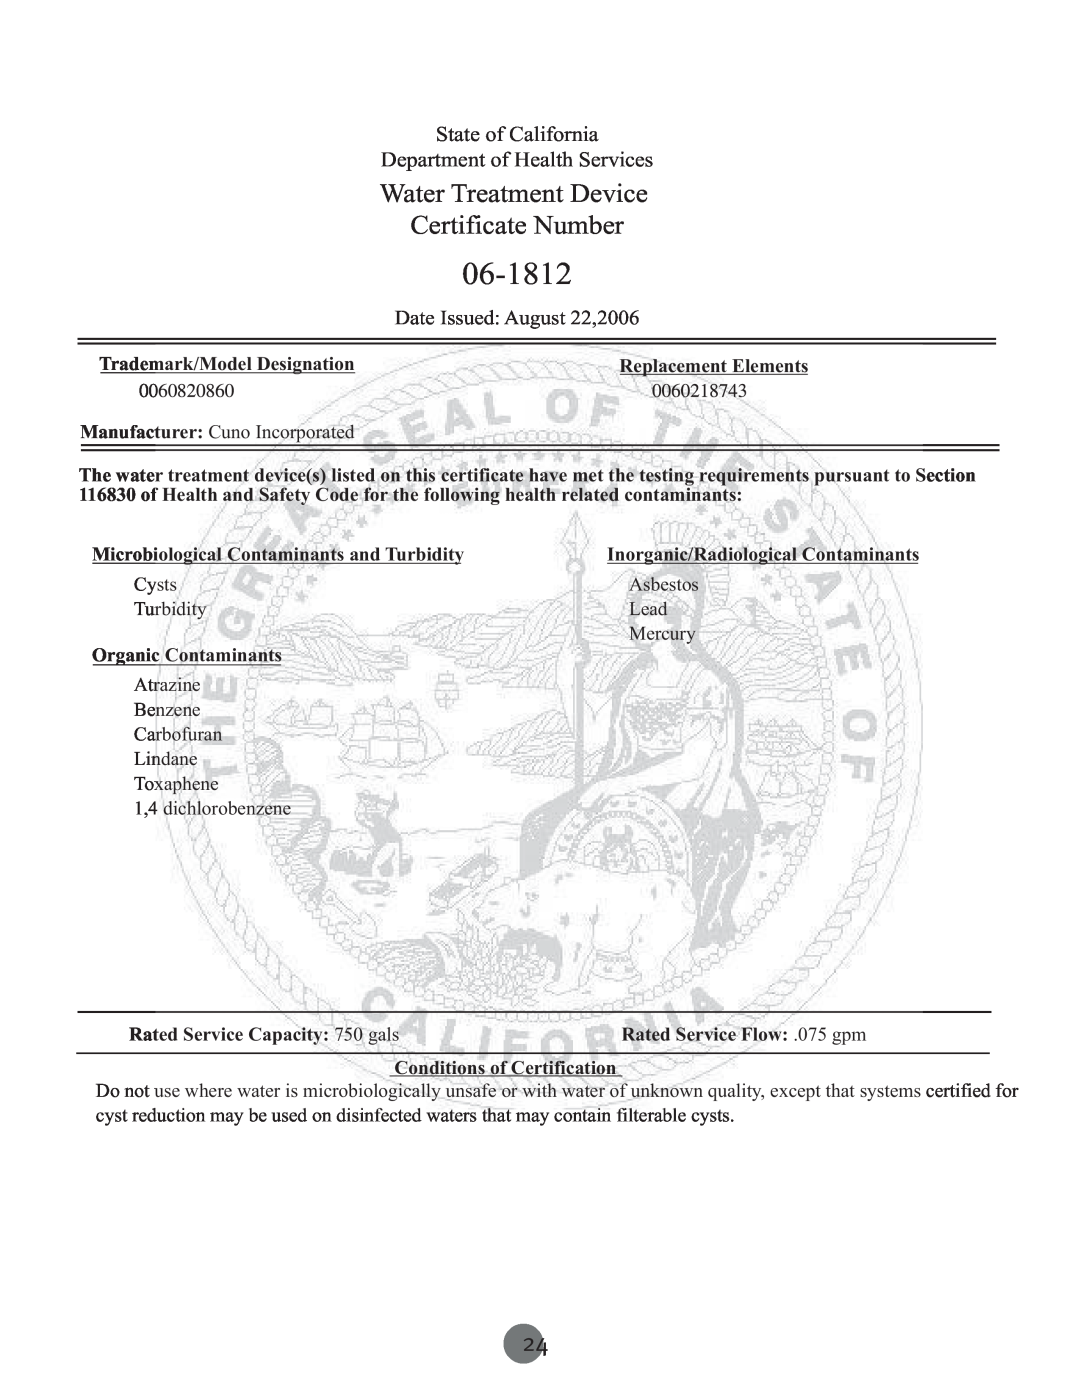 Haier RRCS25, PRCS25 06-1812, Water Treatment Device Certificate Number, State of California Department of Health Services 